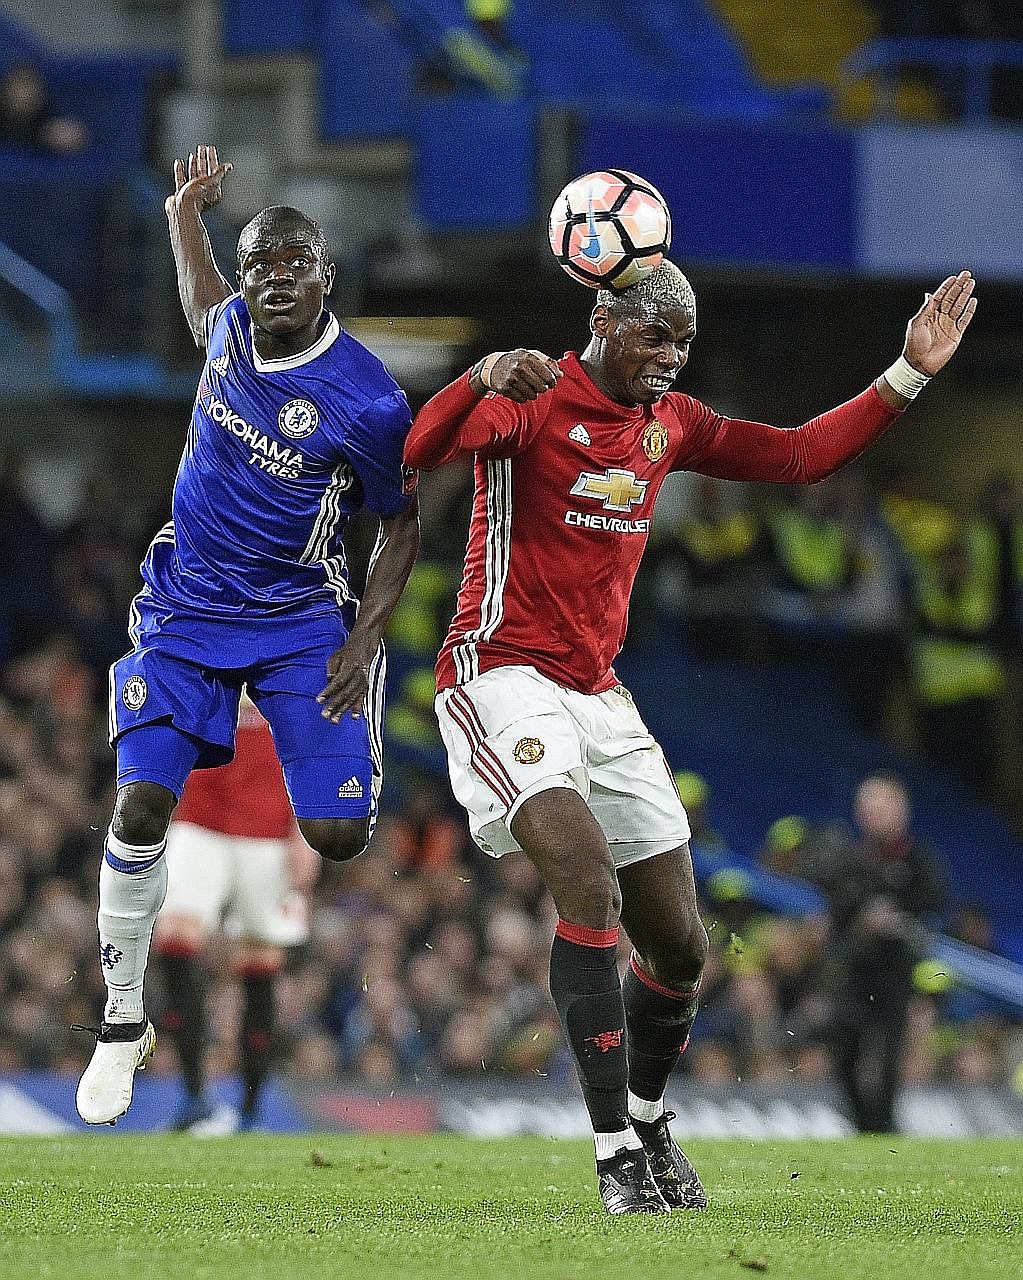 Chelsea's midfield dynamo N'Golo Kante outshining his Manchester United counterpart Paul Pogba, scoring the only goal in their 1-0 FA Cup quarter-final win. Kante has been the heartbeat of the Blues as they run away with the Premier League.